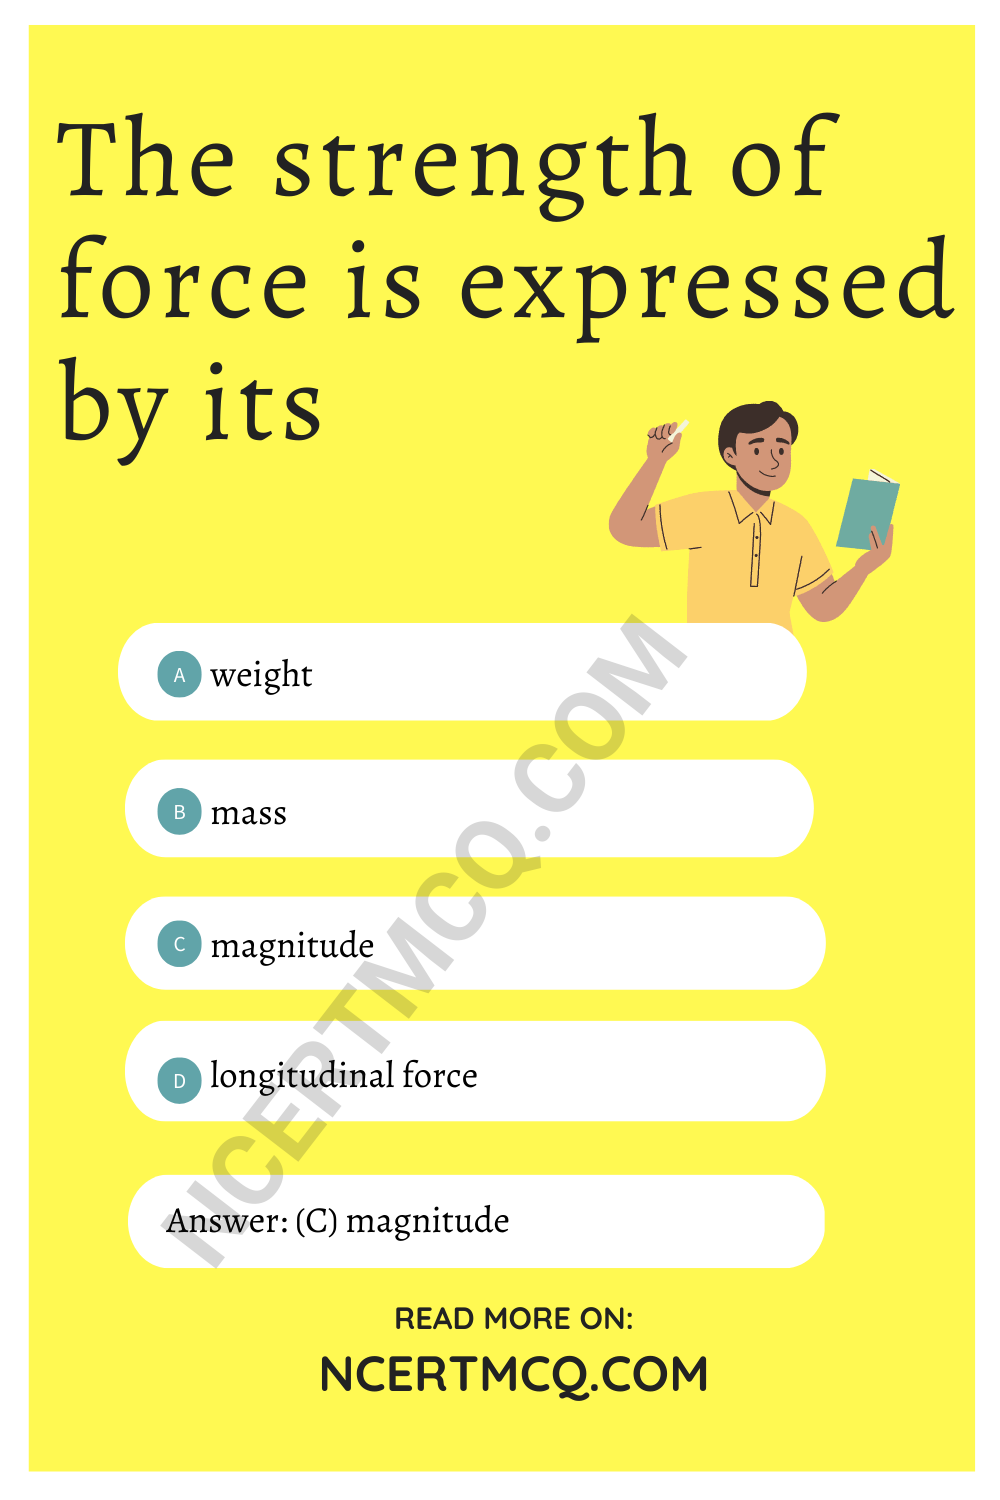 The strength of force is expressed by its